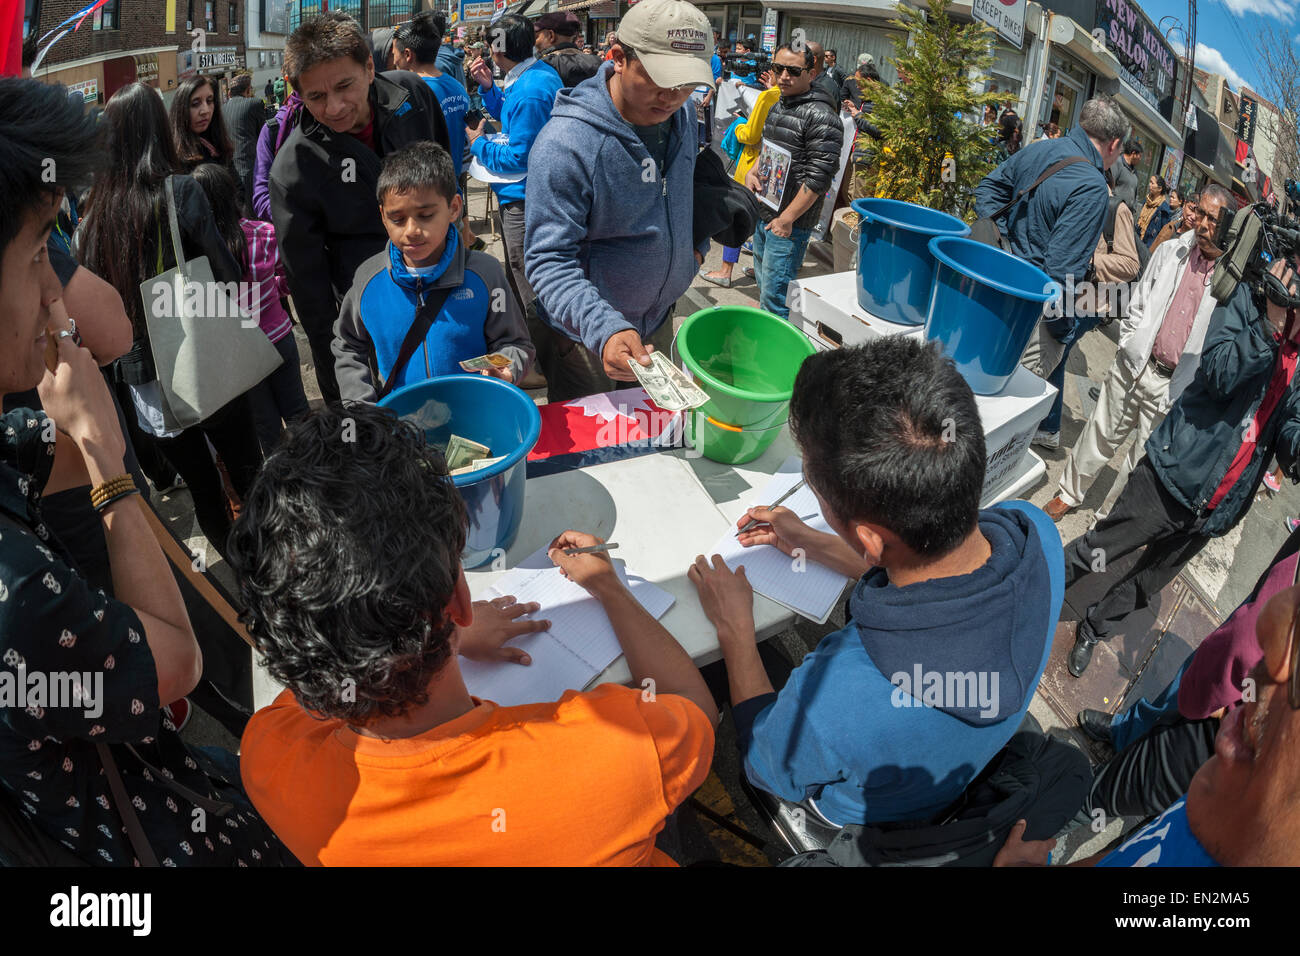 Jackson Heights, New York, USA. 26th Apr, 2015. Members of the Nepalese community in Jackson Heights in New York collect money for victims of the Nepalese earthquake, on Sunday, April 26, 2015. Jackson Heights has a sizable Nepalese community with many members worried about the whereabouts and safety of family and friends. Over 2500 people have died in the massive earthquake. Credit:  Richard Levine/Alamy Live News Stock Photo